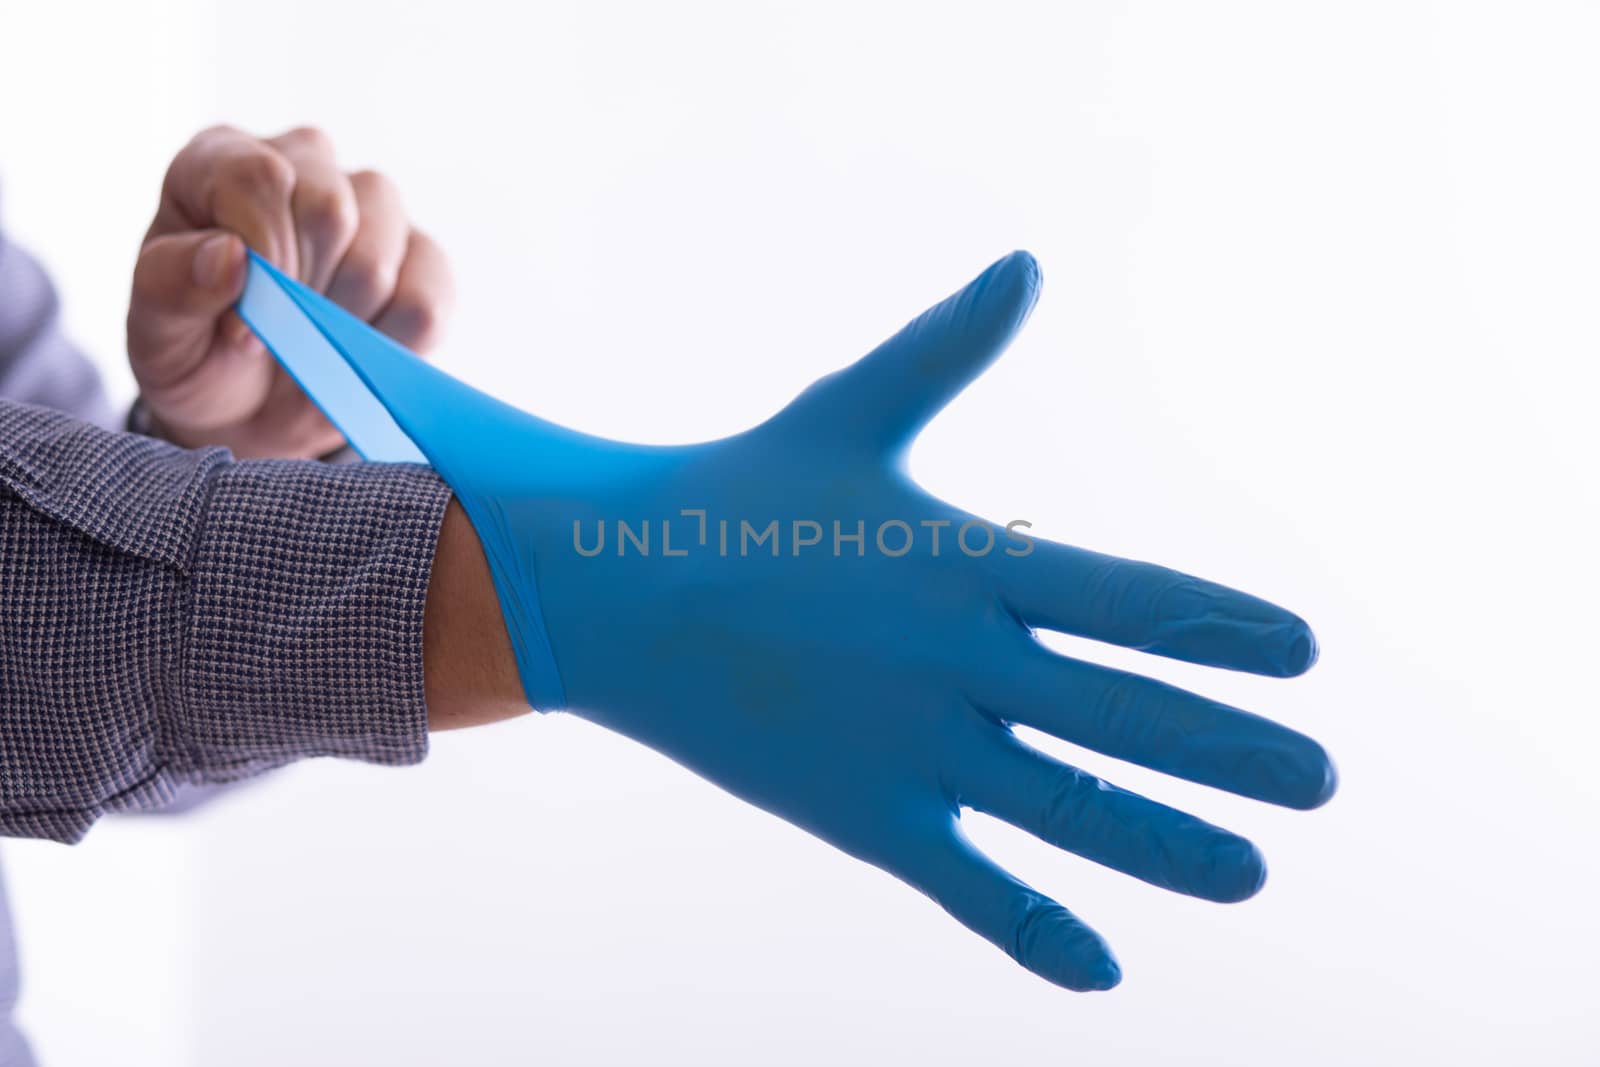 Man Wearing Gloves For Protection From Virus Stock Photo